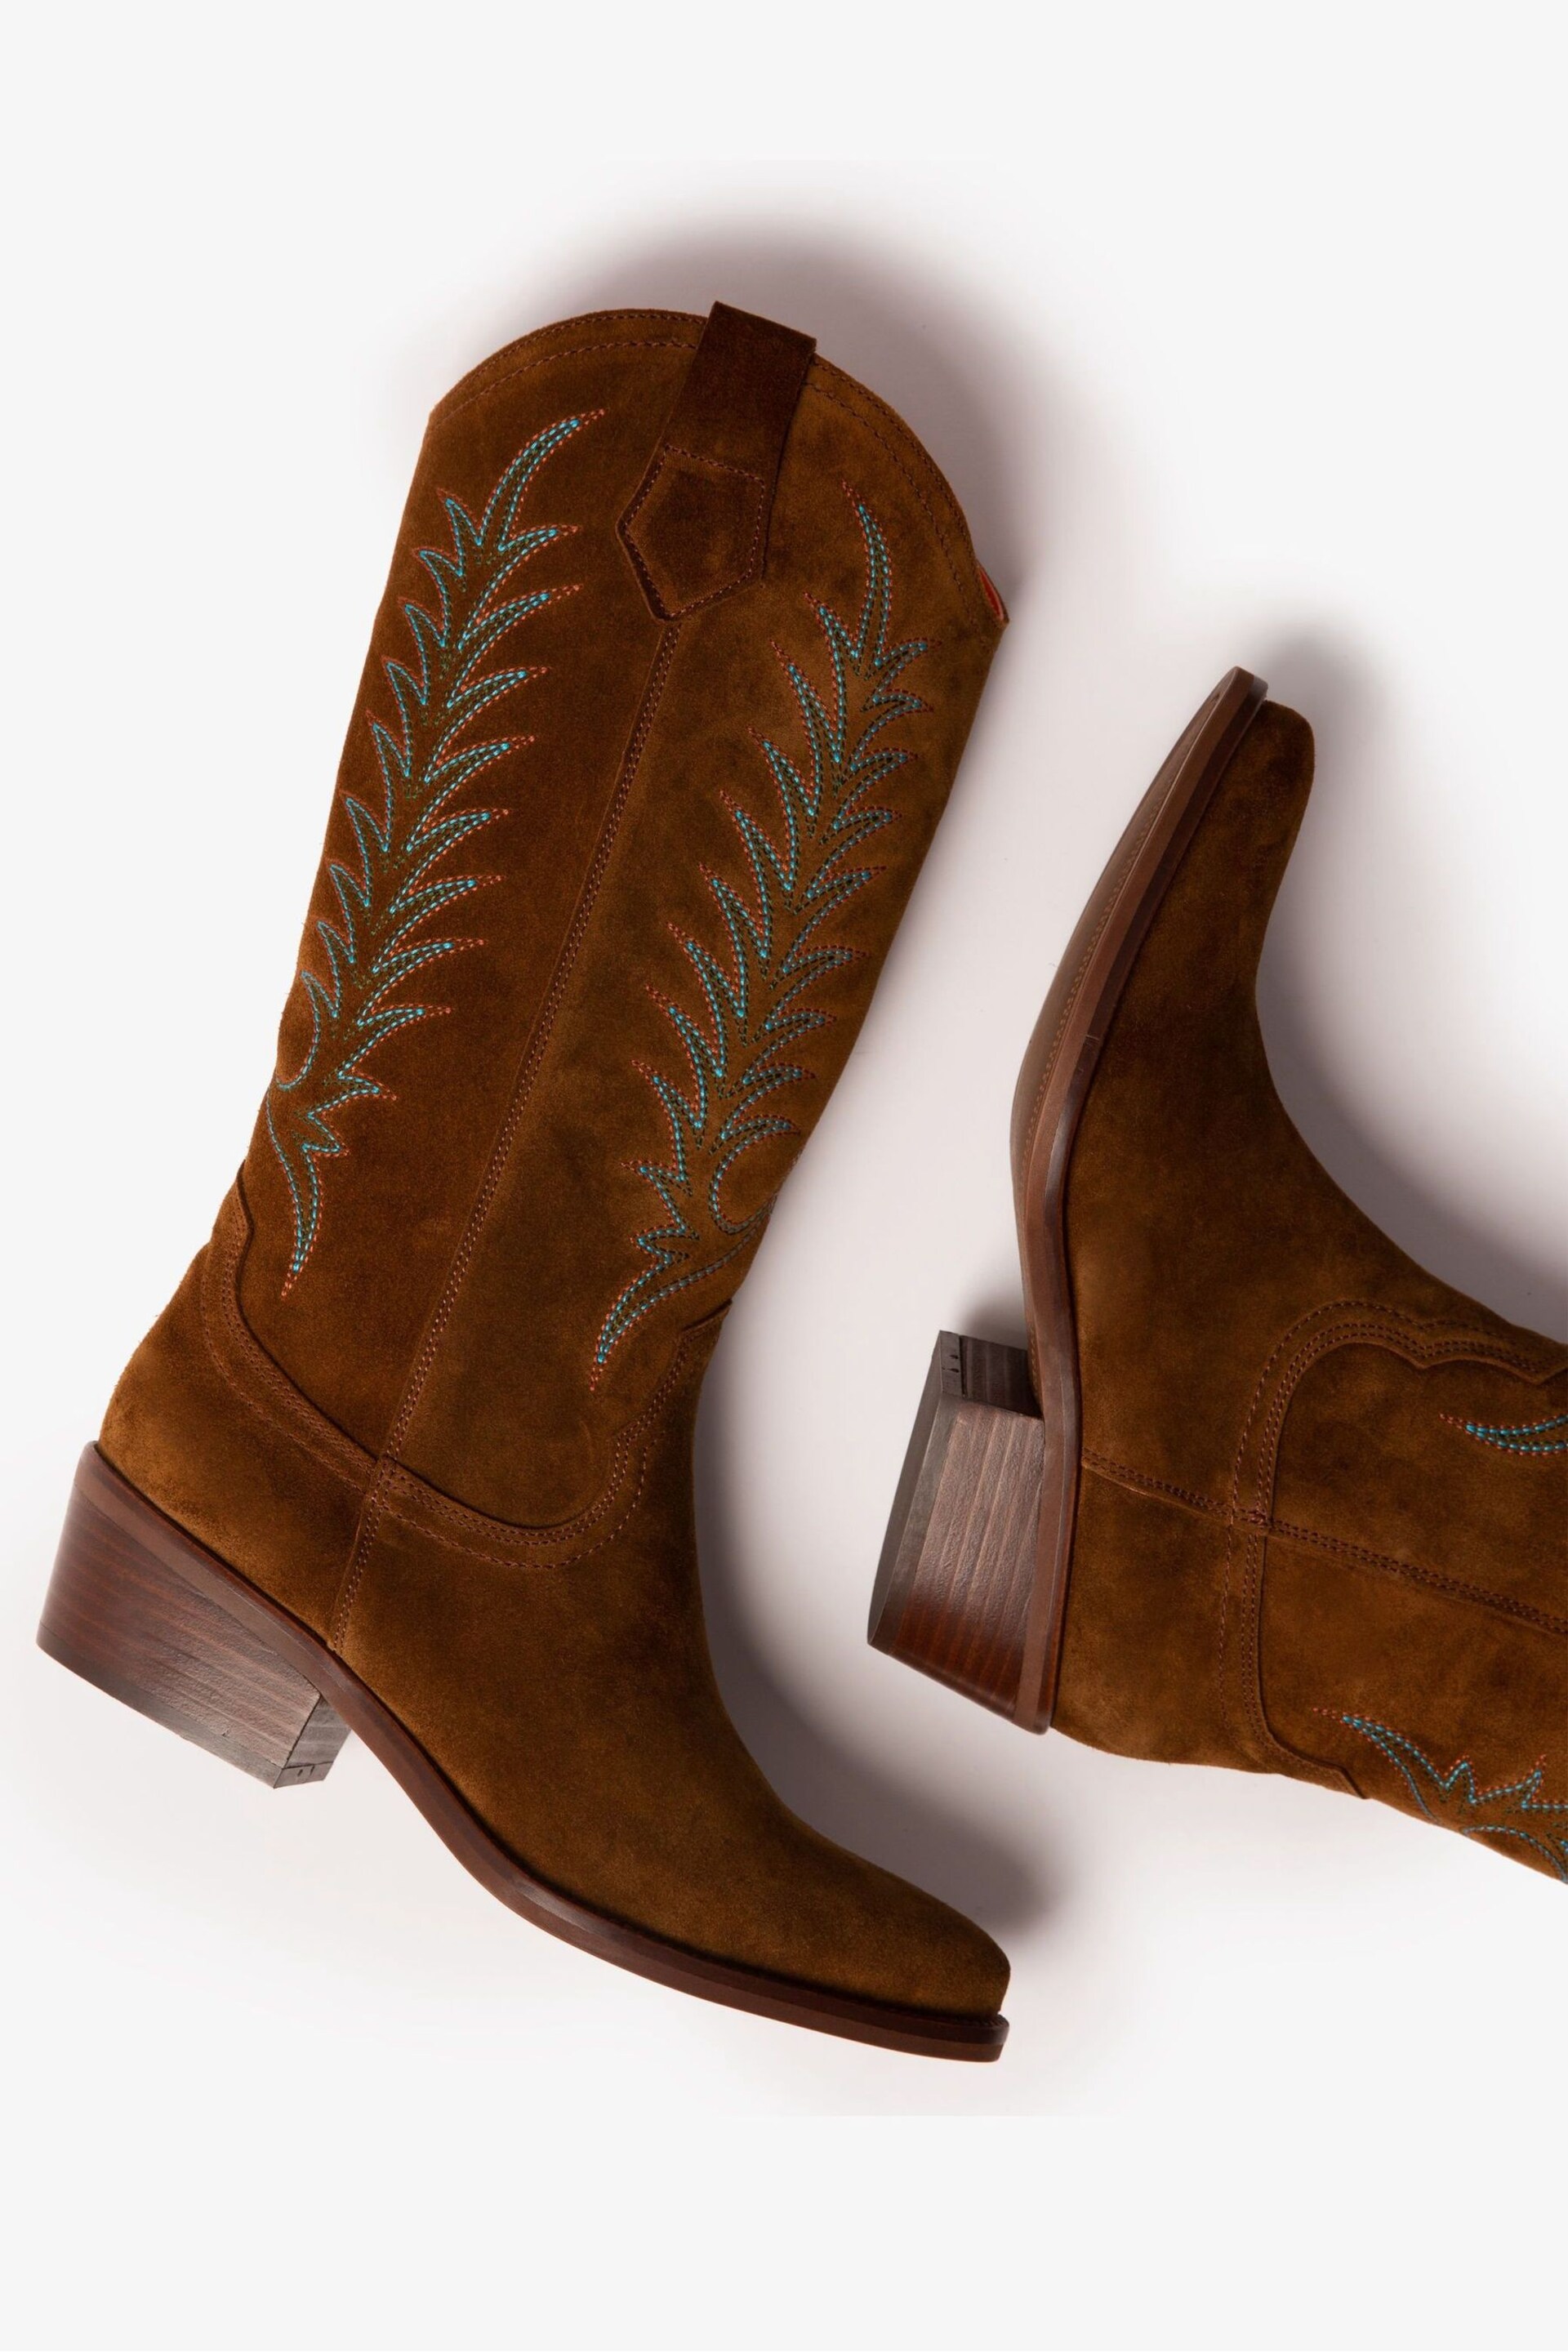 Penelope Chilvers Goldie Embroidered Cowboy Brown Boots - Image 12 of 16